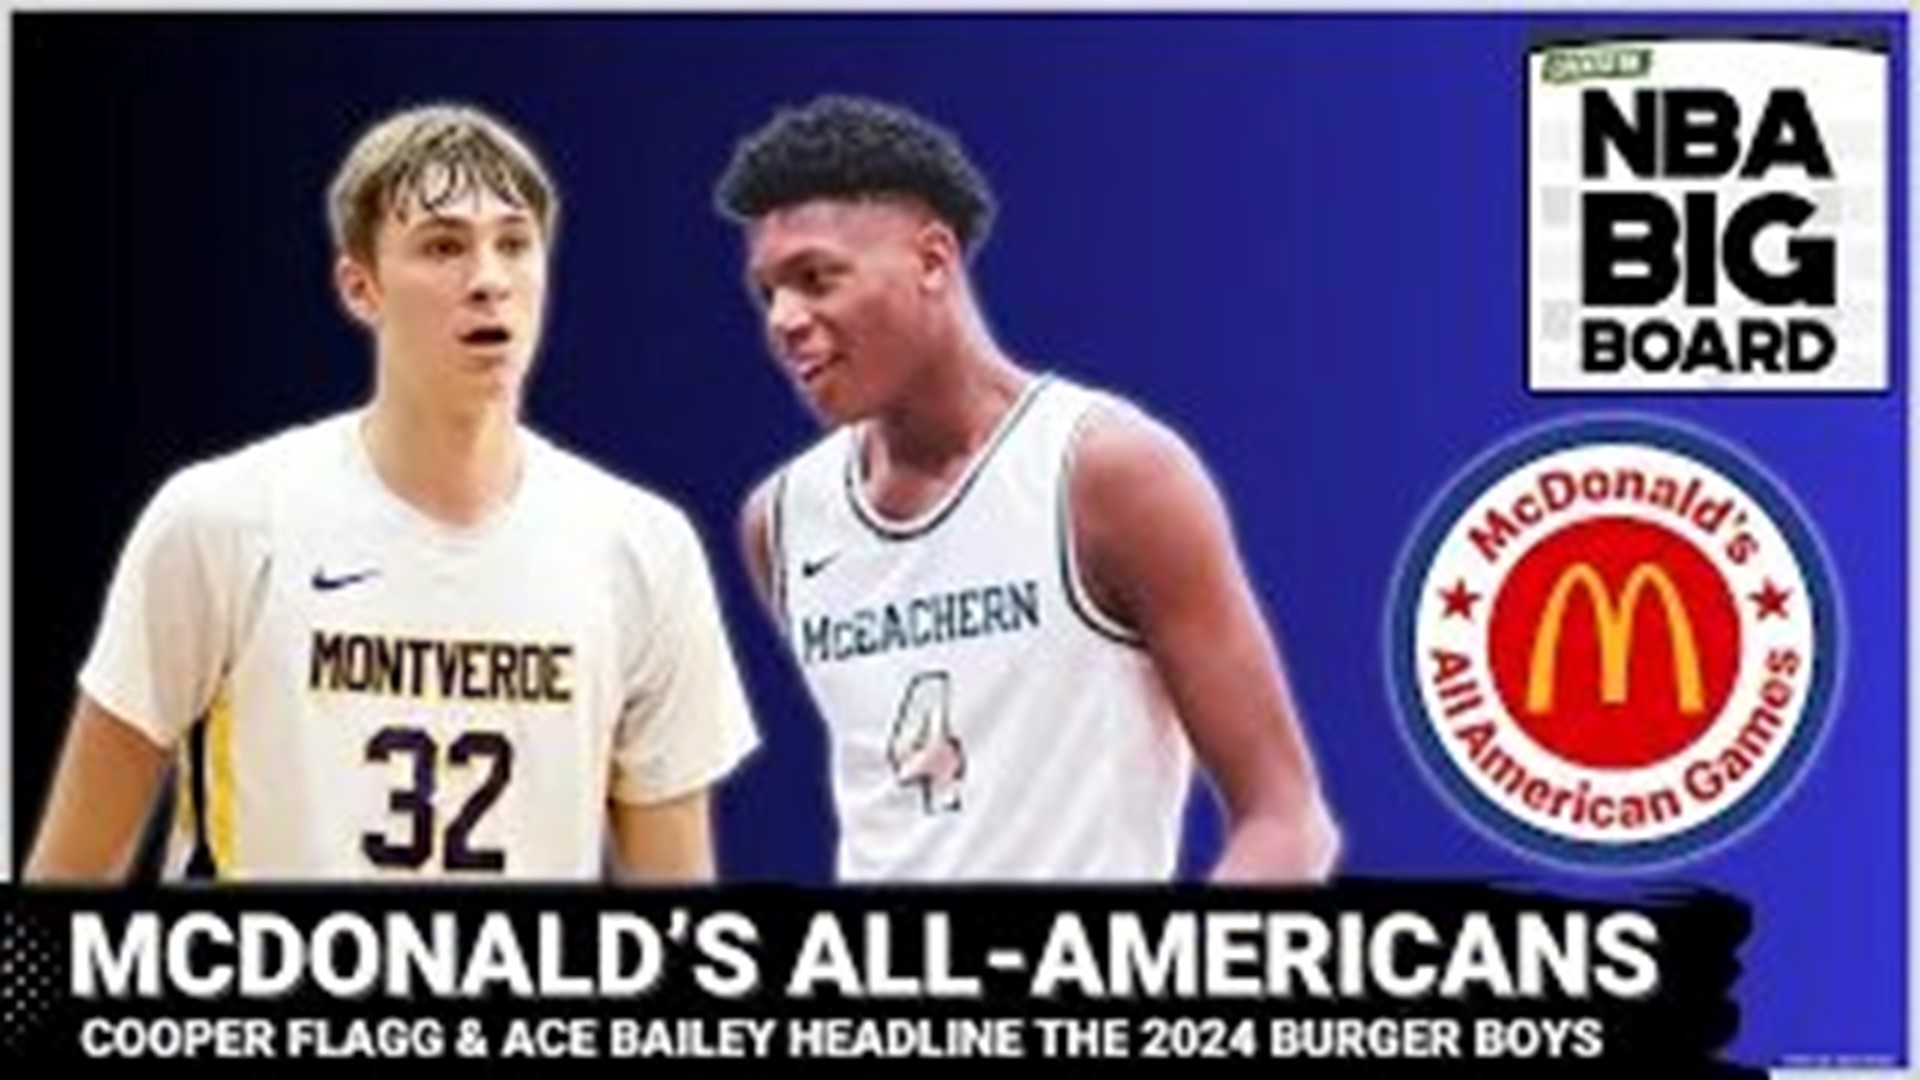 Rafael Barlowe is joined by grassroots scouting guru Max Feldman to discuss several of the top names selected for the 2024 McDonald's All-American game.